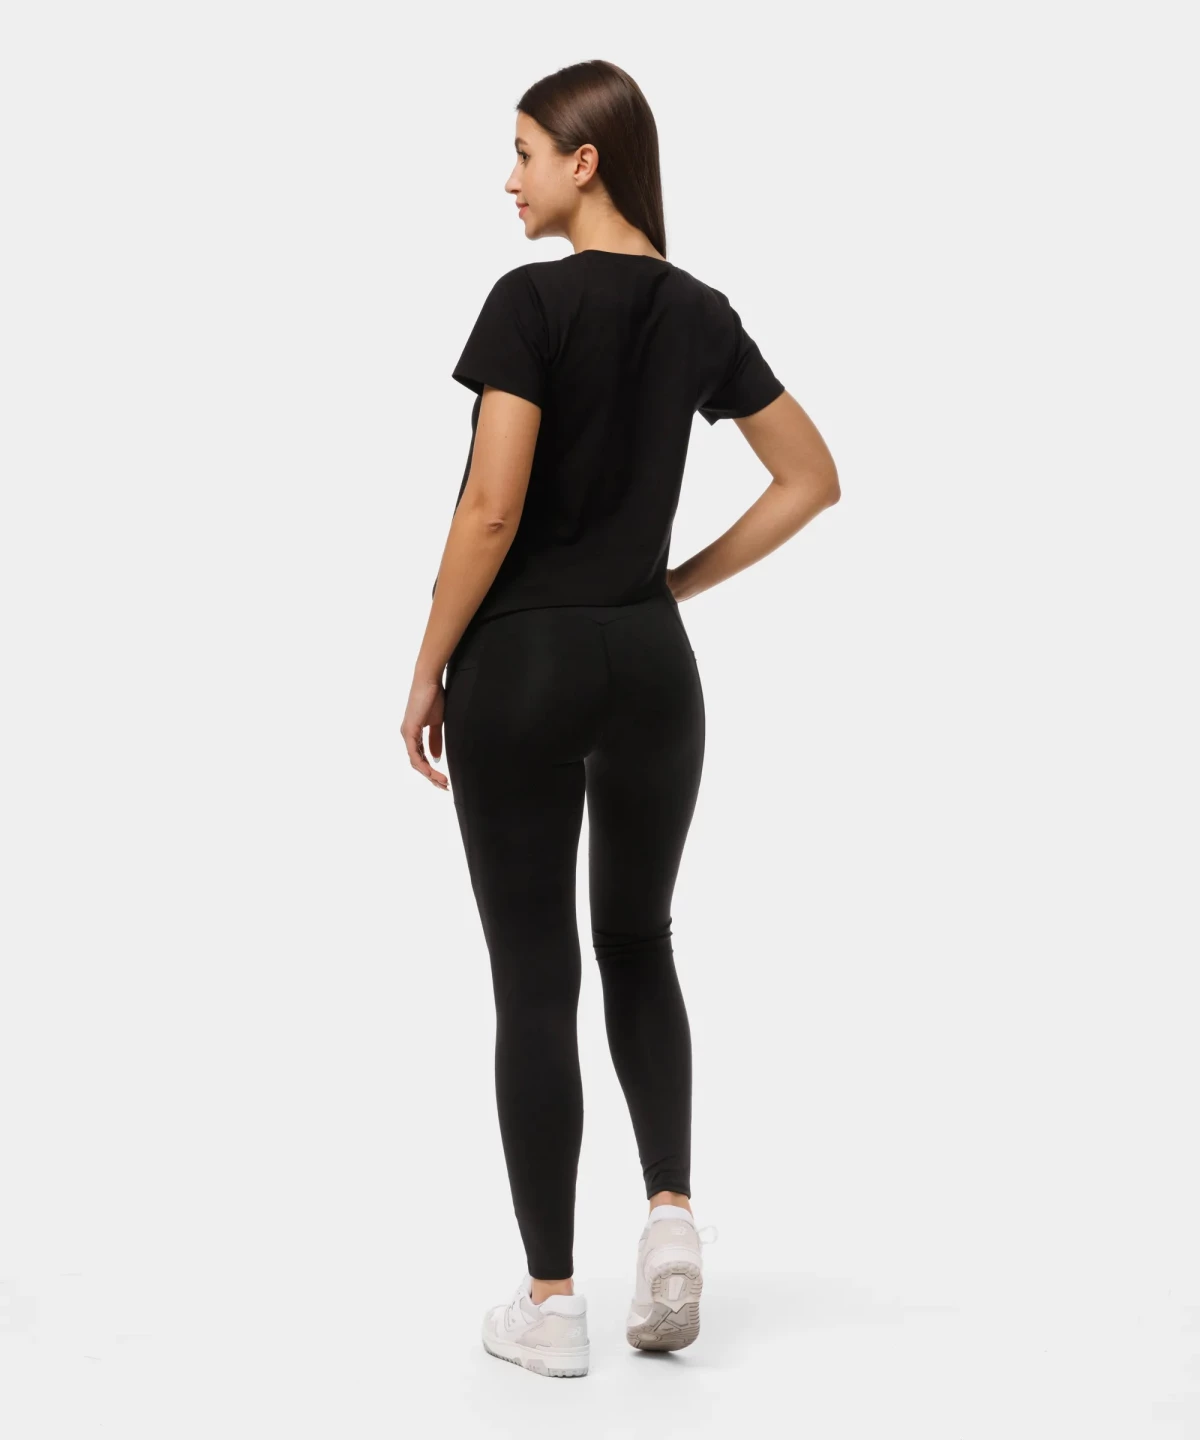 Nothing seems more comfortable than a pair of Prisma's #leggings and a  T-shirt. Wear it at home or even to meet…